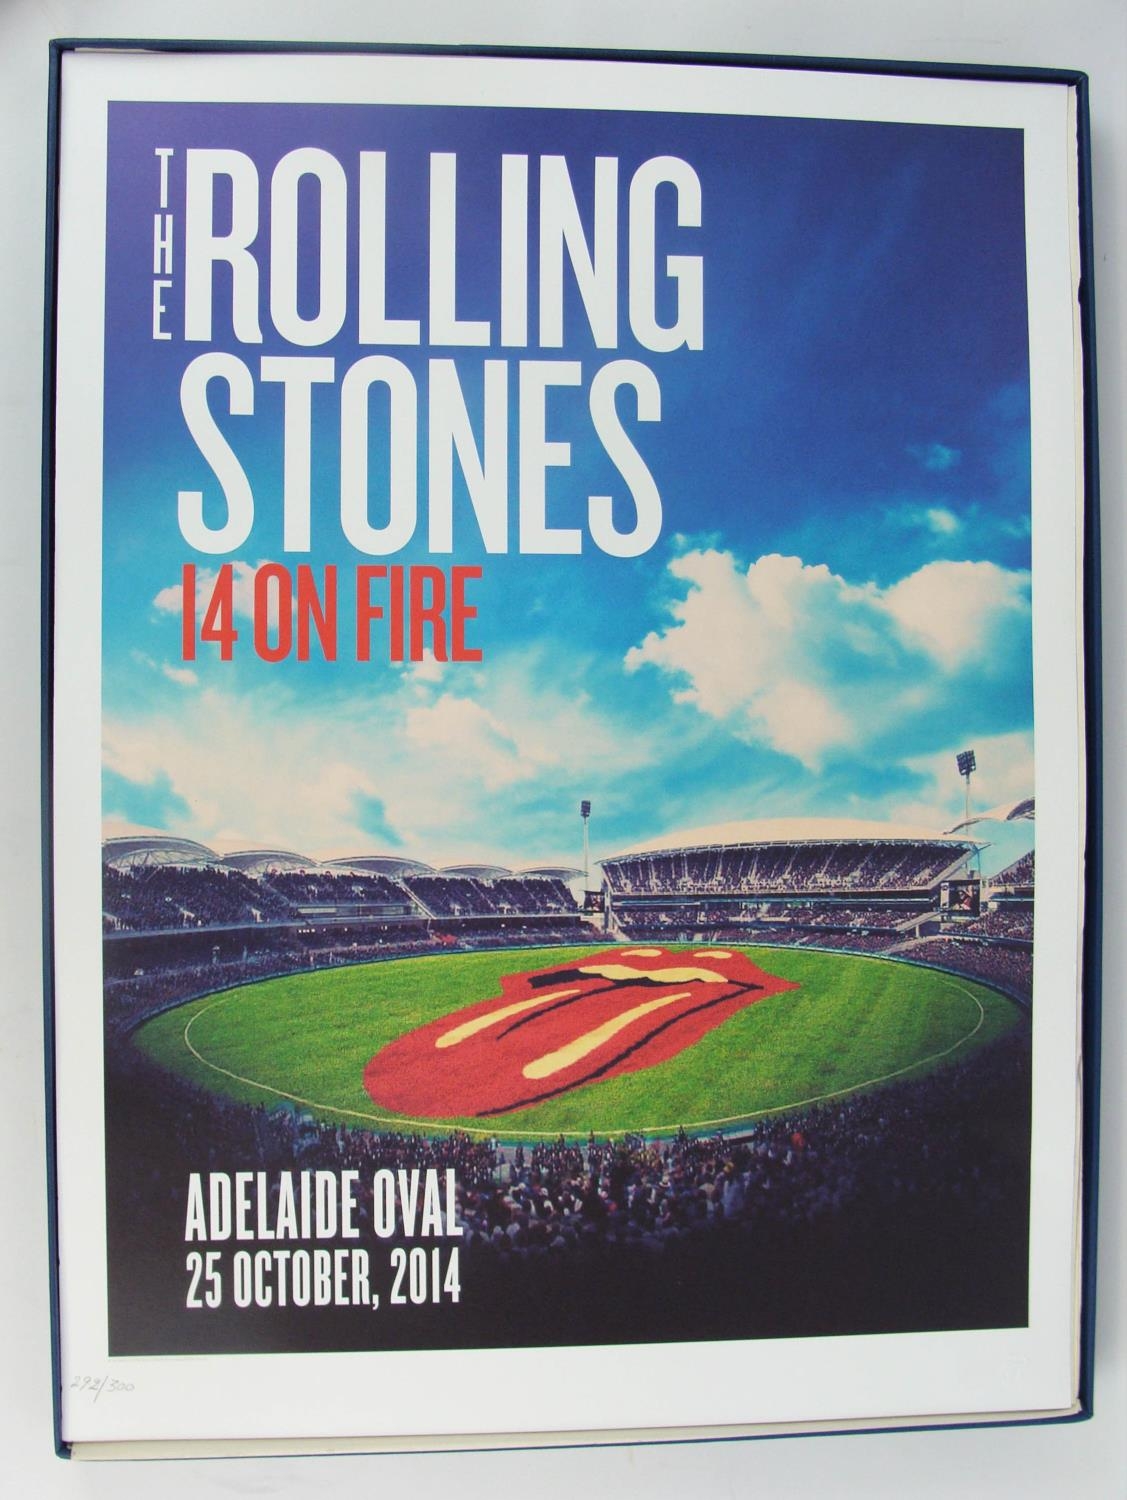 ROLLING STONES '14 on FIRE' BOX SET, of 13 lithographic posters from the 2014 Australia and New - Image 10 of 21